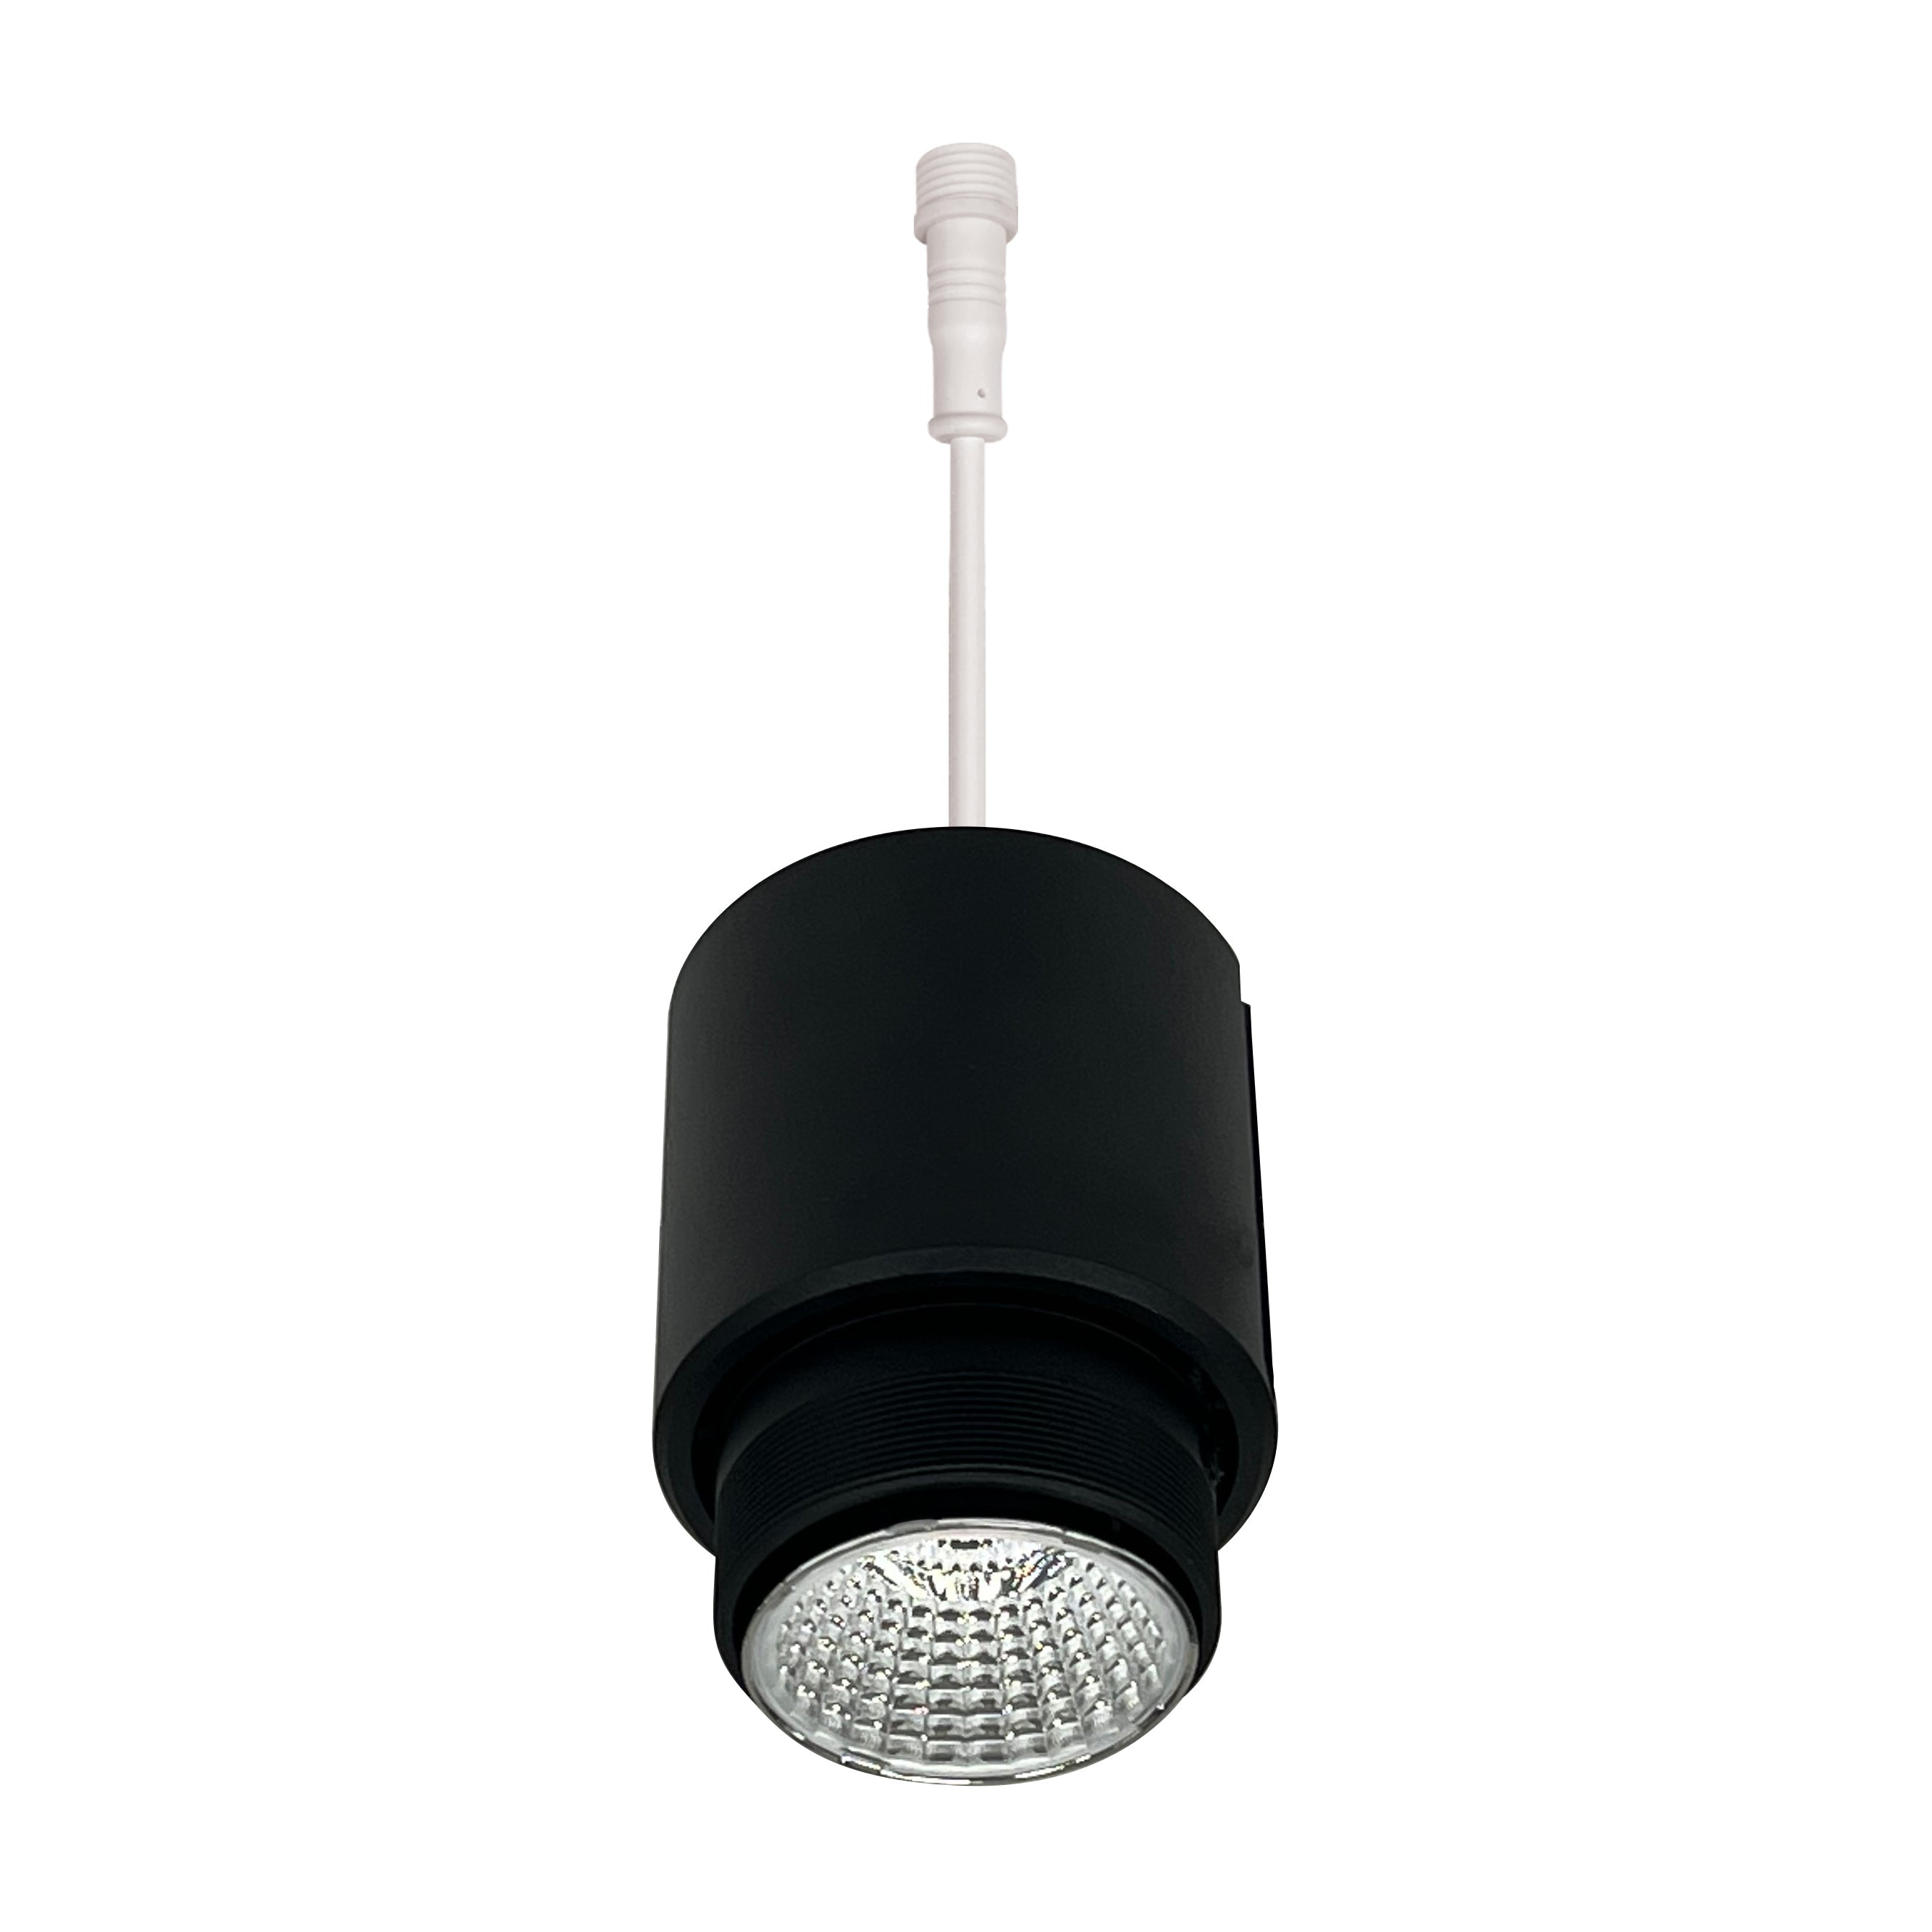 Nora Lighting NIOC-24LED935X - Recessed - 2 Inch & 4 Inch Iolite Can-less LED Module, 3500K